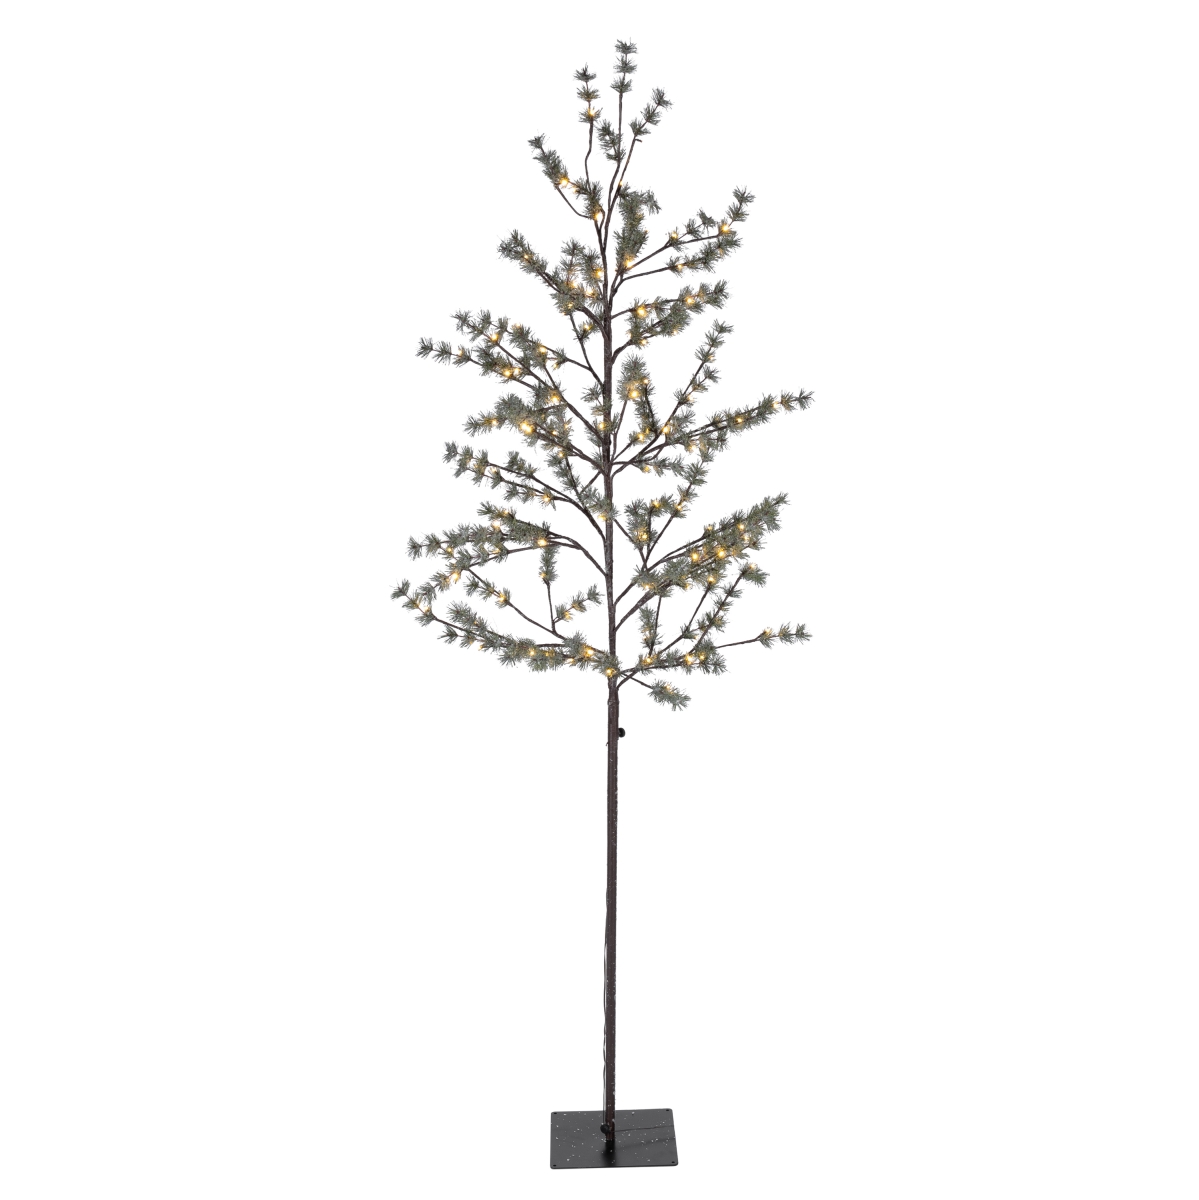 Everlasting Glow 46022EC 7 ft. Tall Icy Pine Winter Lighted Tree - Warm White LED